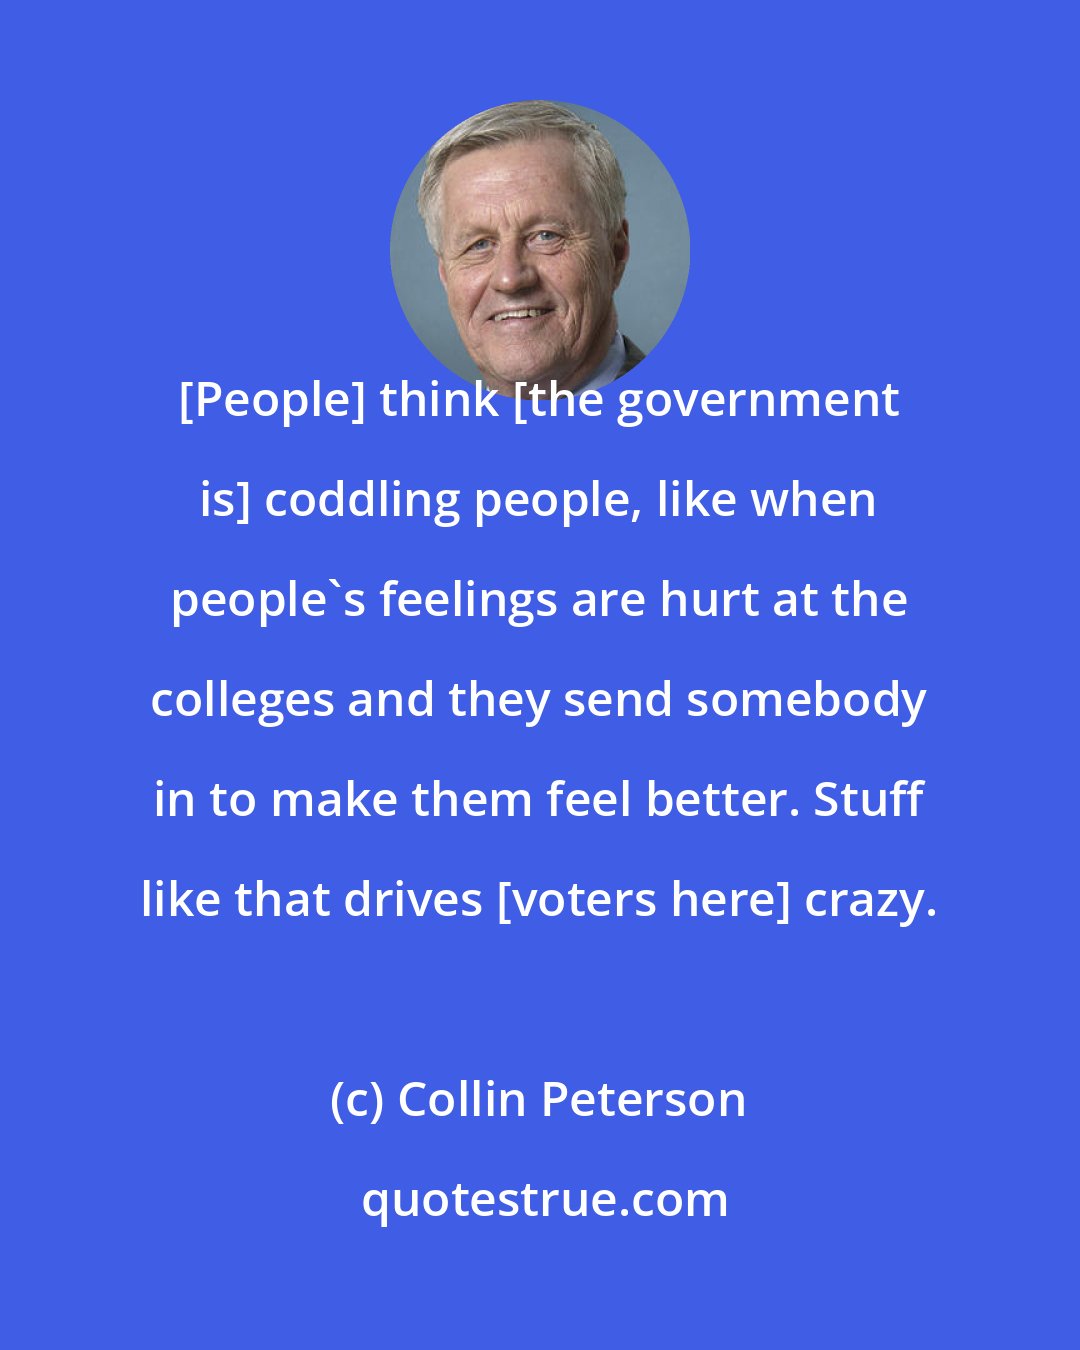 Collin Peterson: [People] think [the government is] coddling people, like when people's feelings are hurt at the colleges and they send somebody in to make them feel better. Stuff like that drives [voters here] crazy.